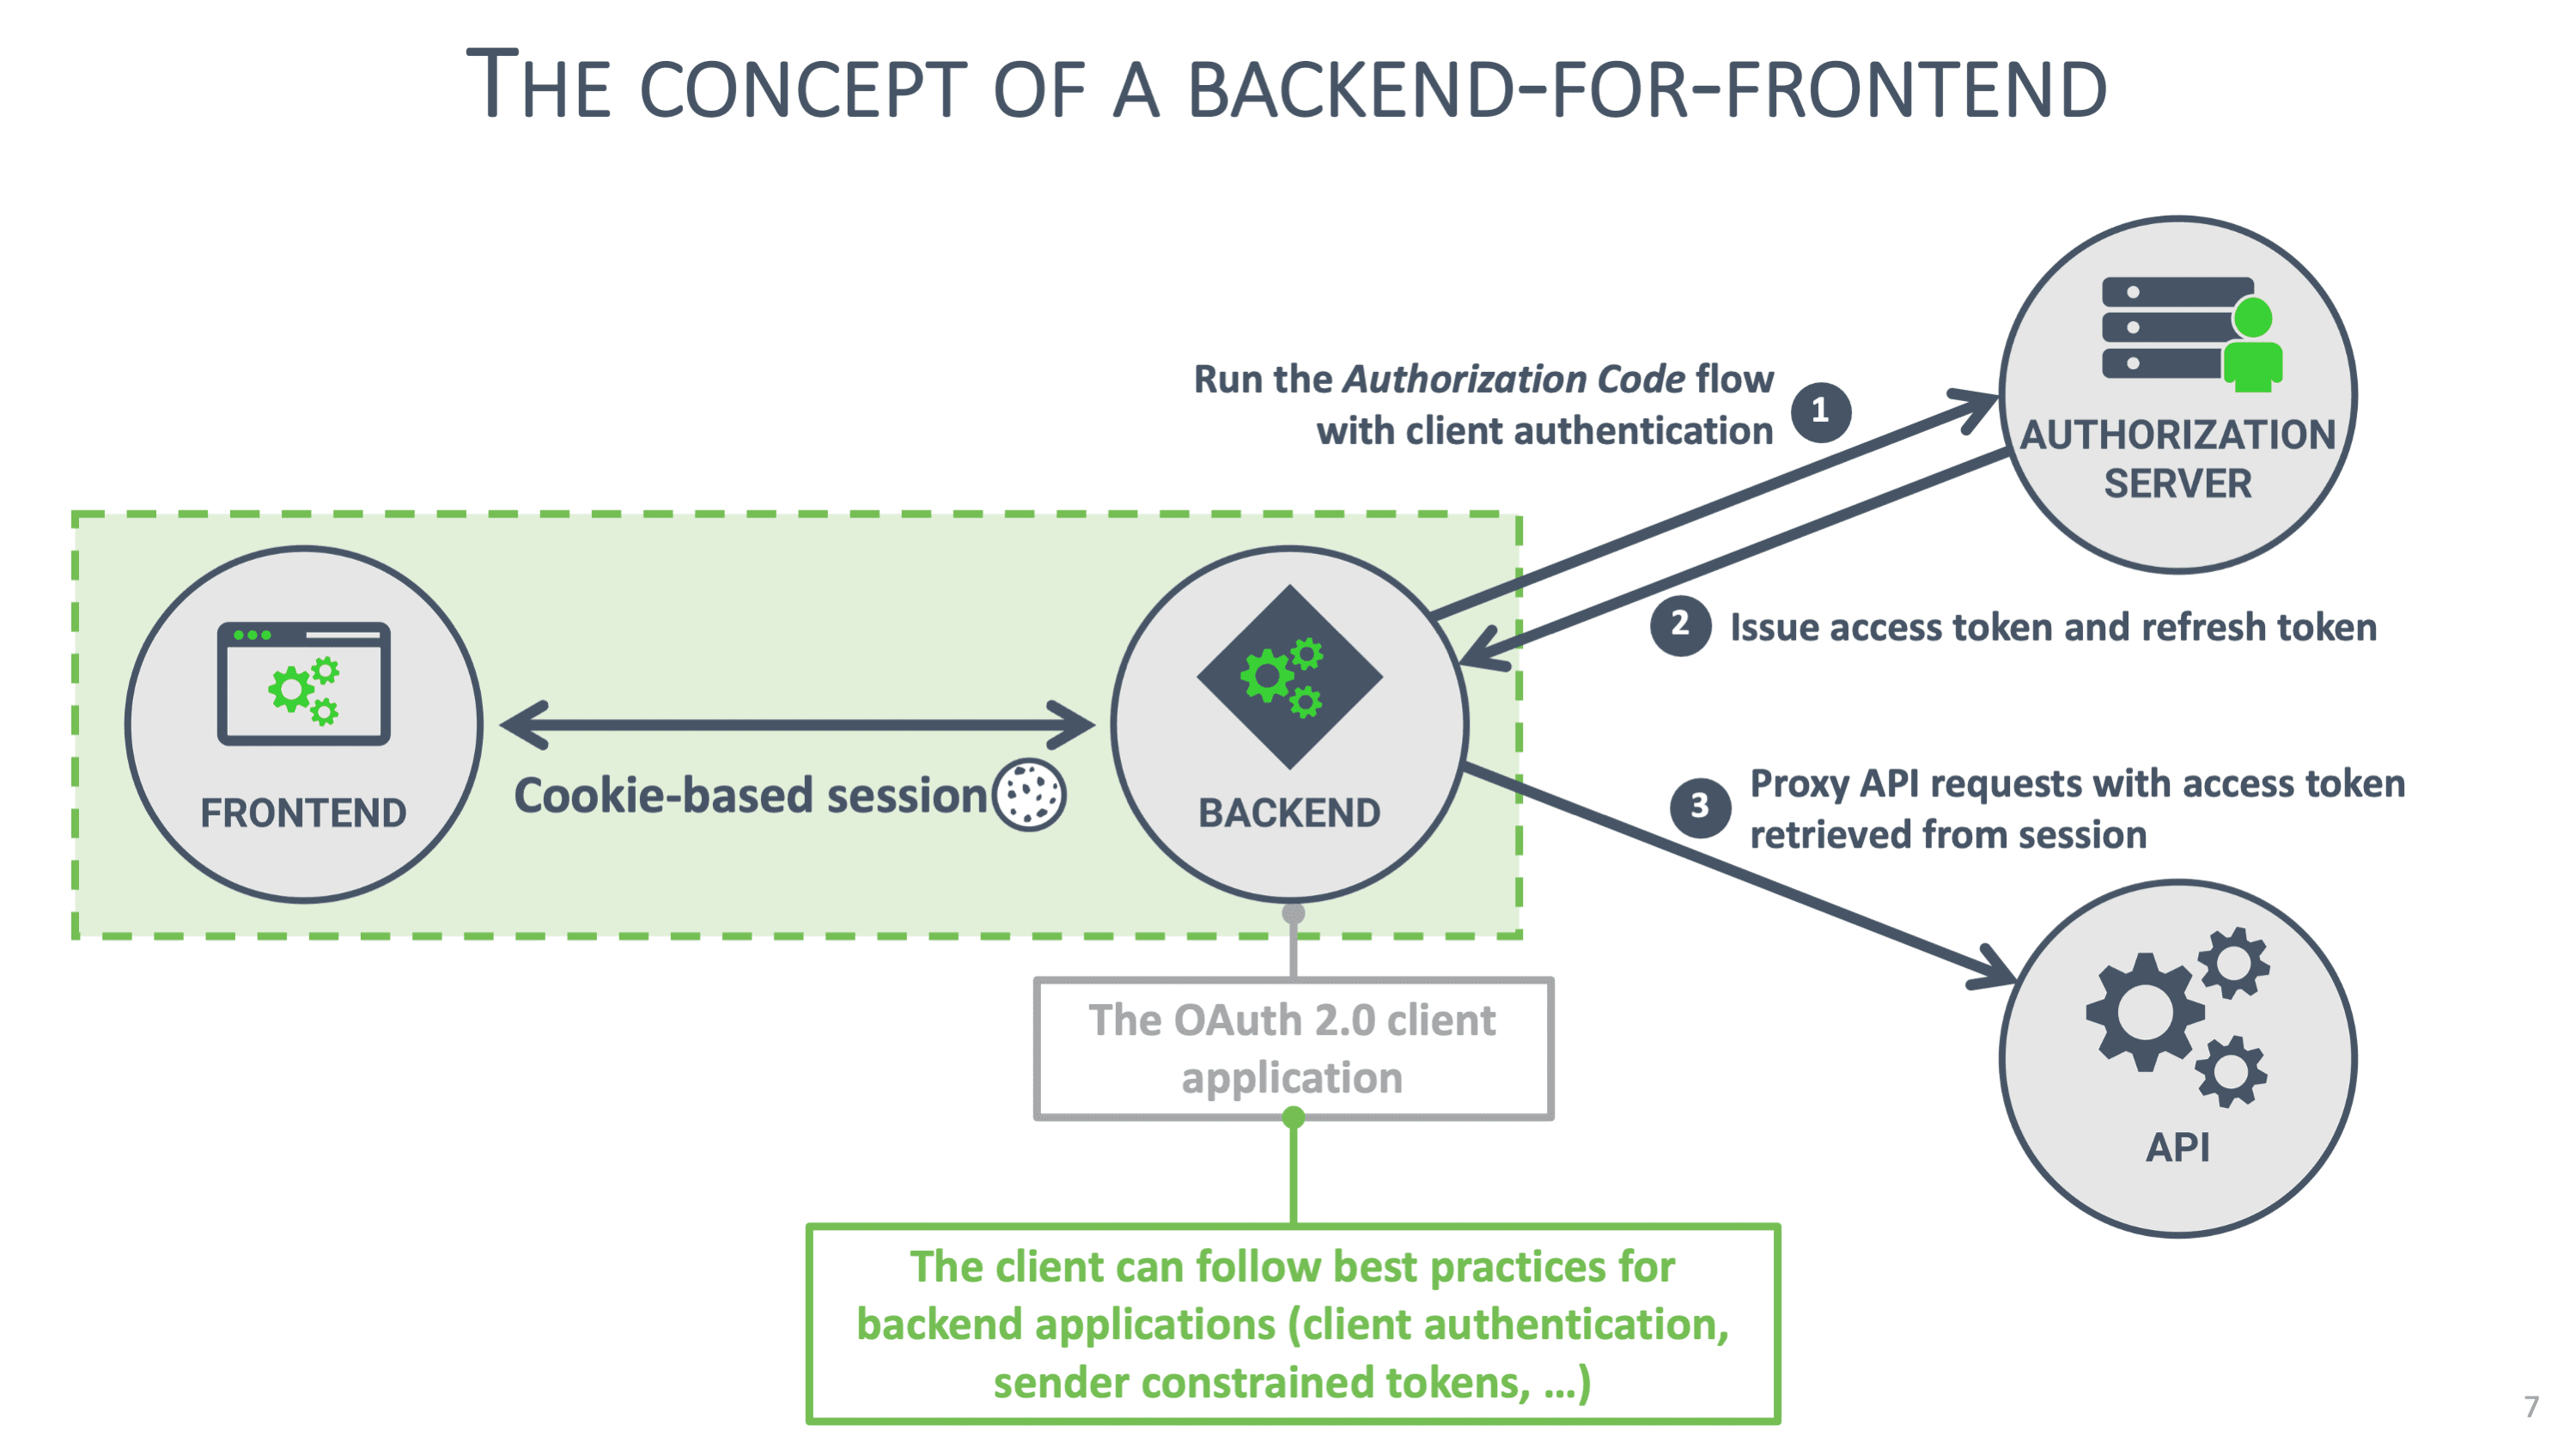 Diagram showing the concept of a backend-for-frontend (BFF).